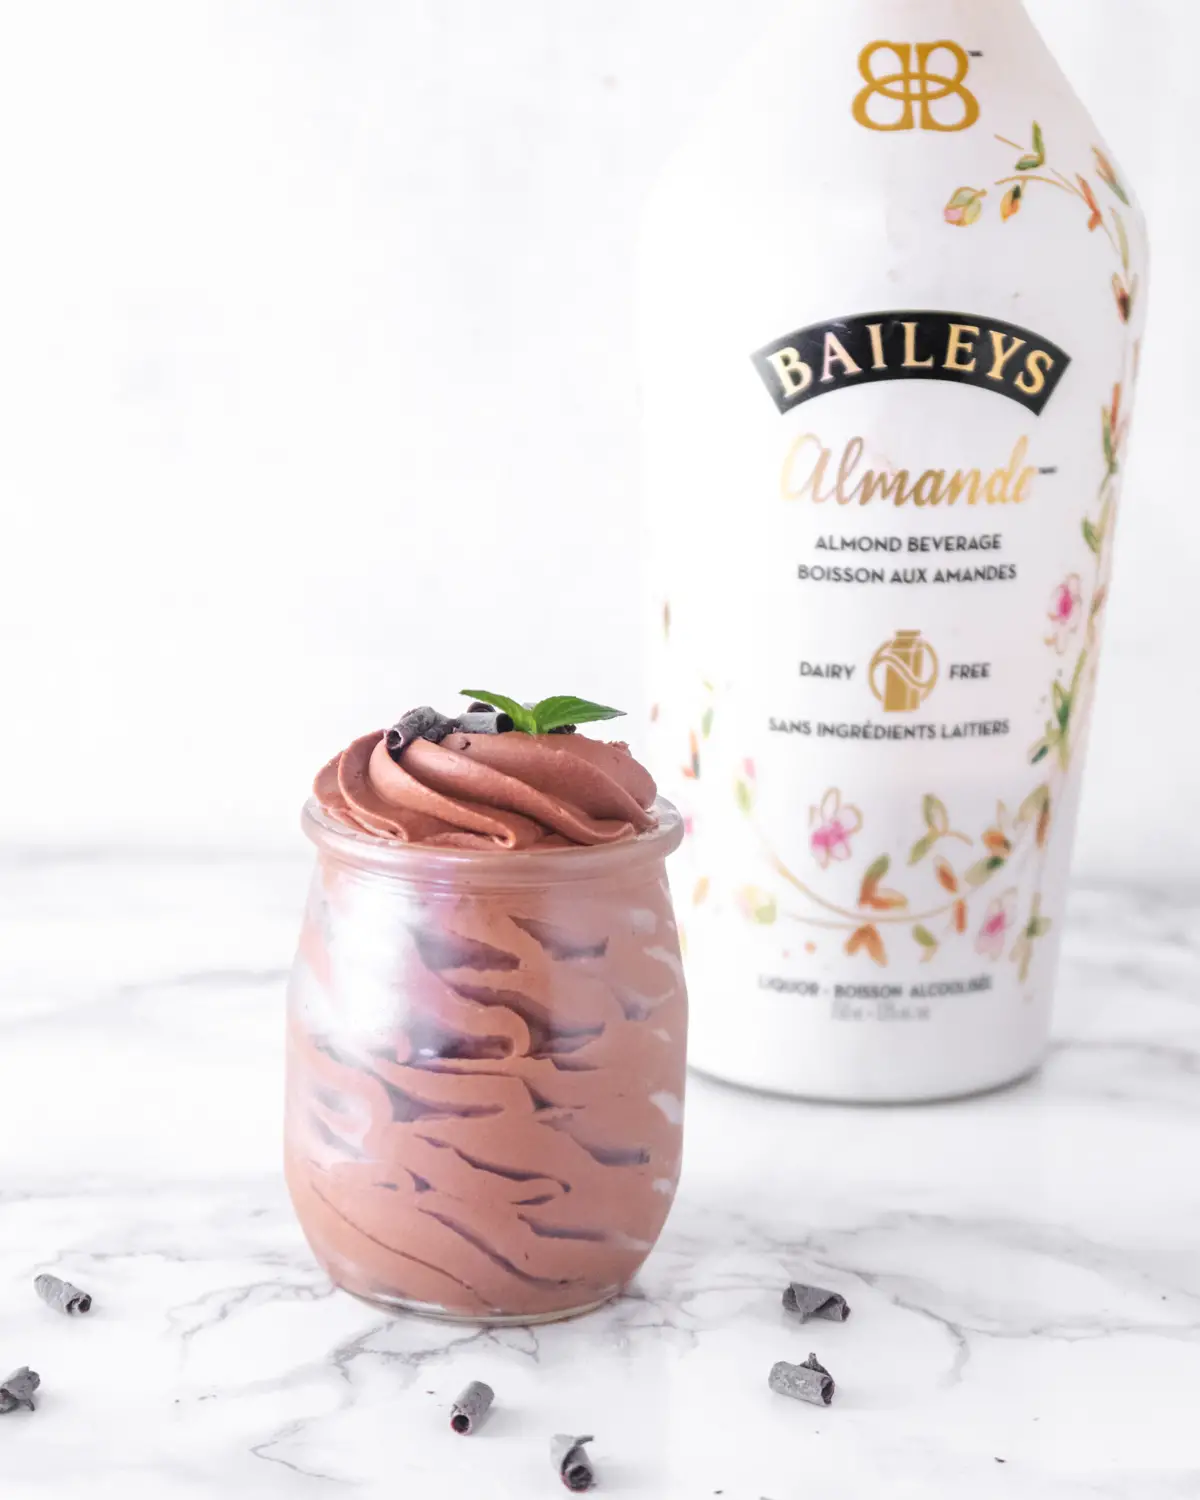 A glass jar filled with vegan Baileys chocolate mousse in front of a bottle of dairy-free Almond Baileys Irish cream.